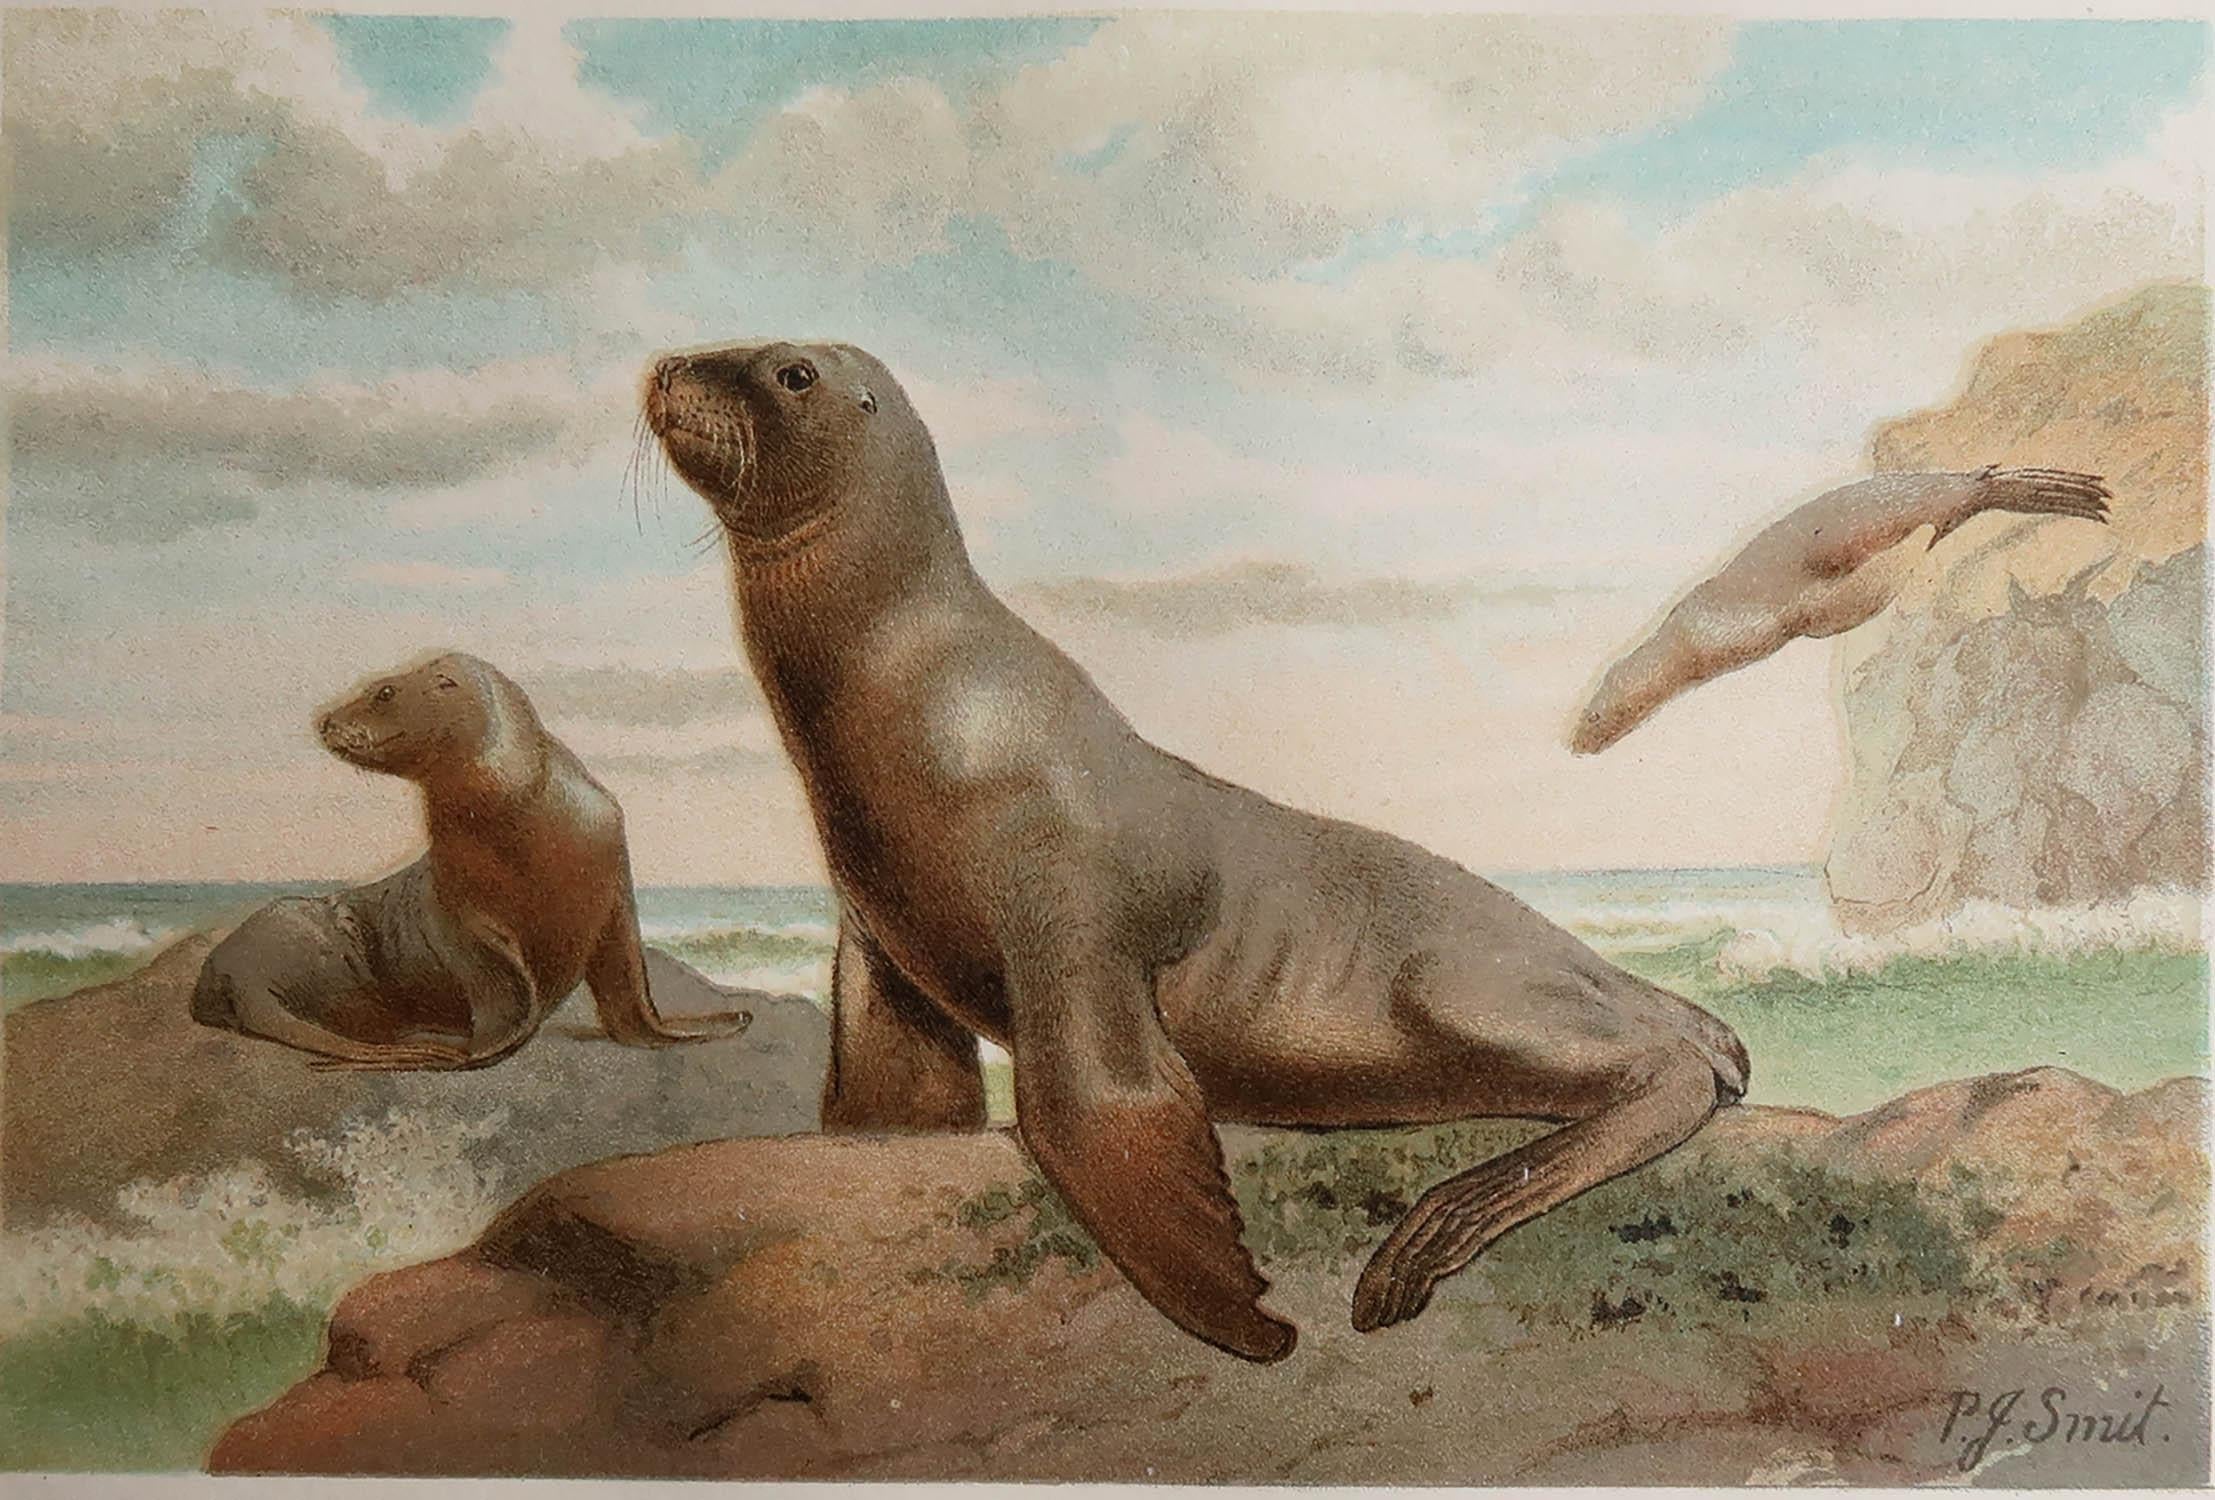 Great image of New Zealand Sea-Lions

Unframed. It gives you the option of perhaps making a set up using your own choice of frames.

Chromolithograph after the original artwork by P.J Smit

Published by F.Warne, C.1890

Free